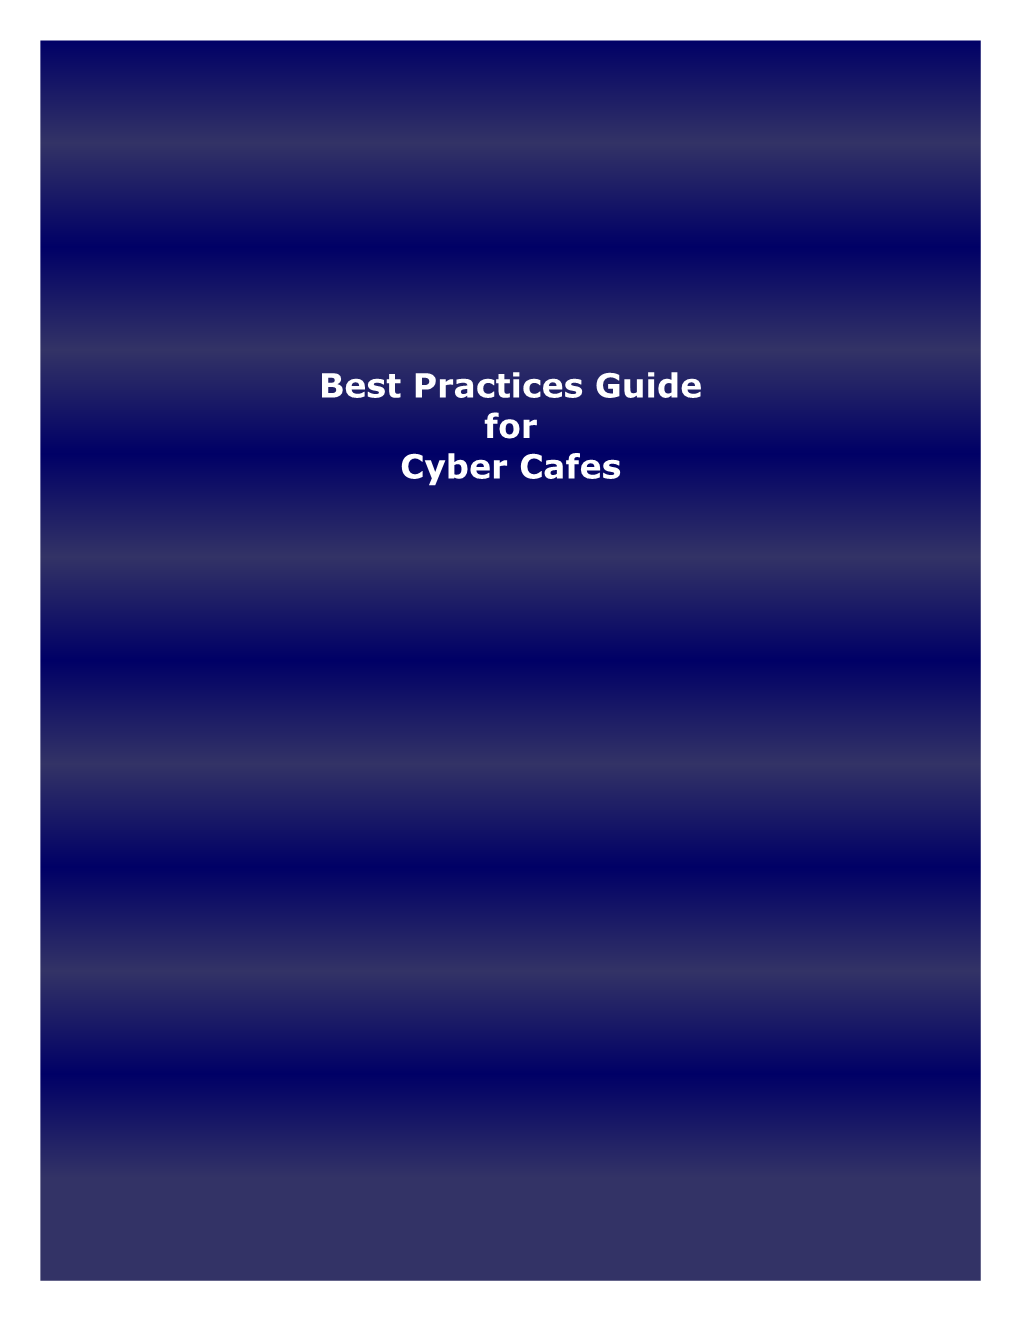 Best Practices Guide for Cyber Cafes